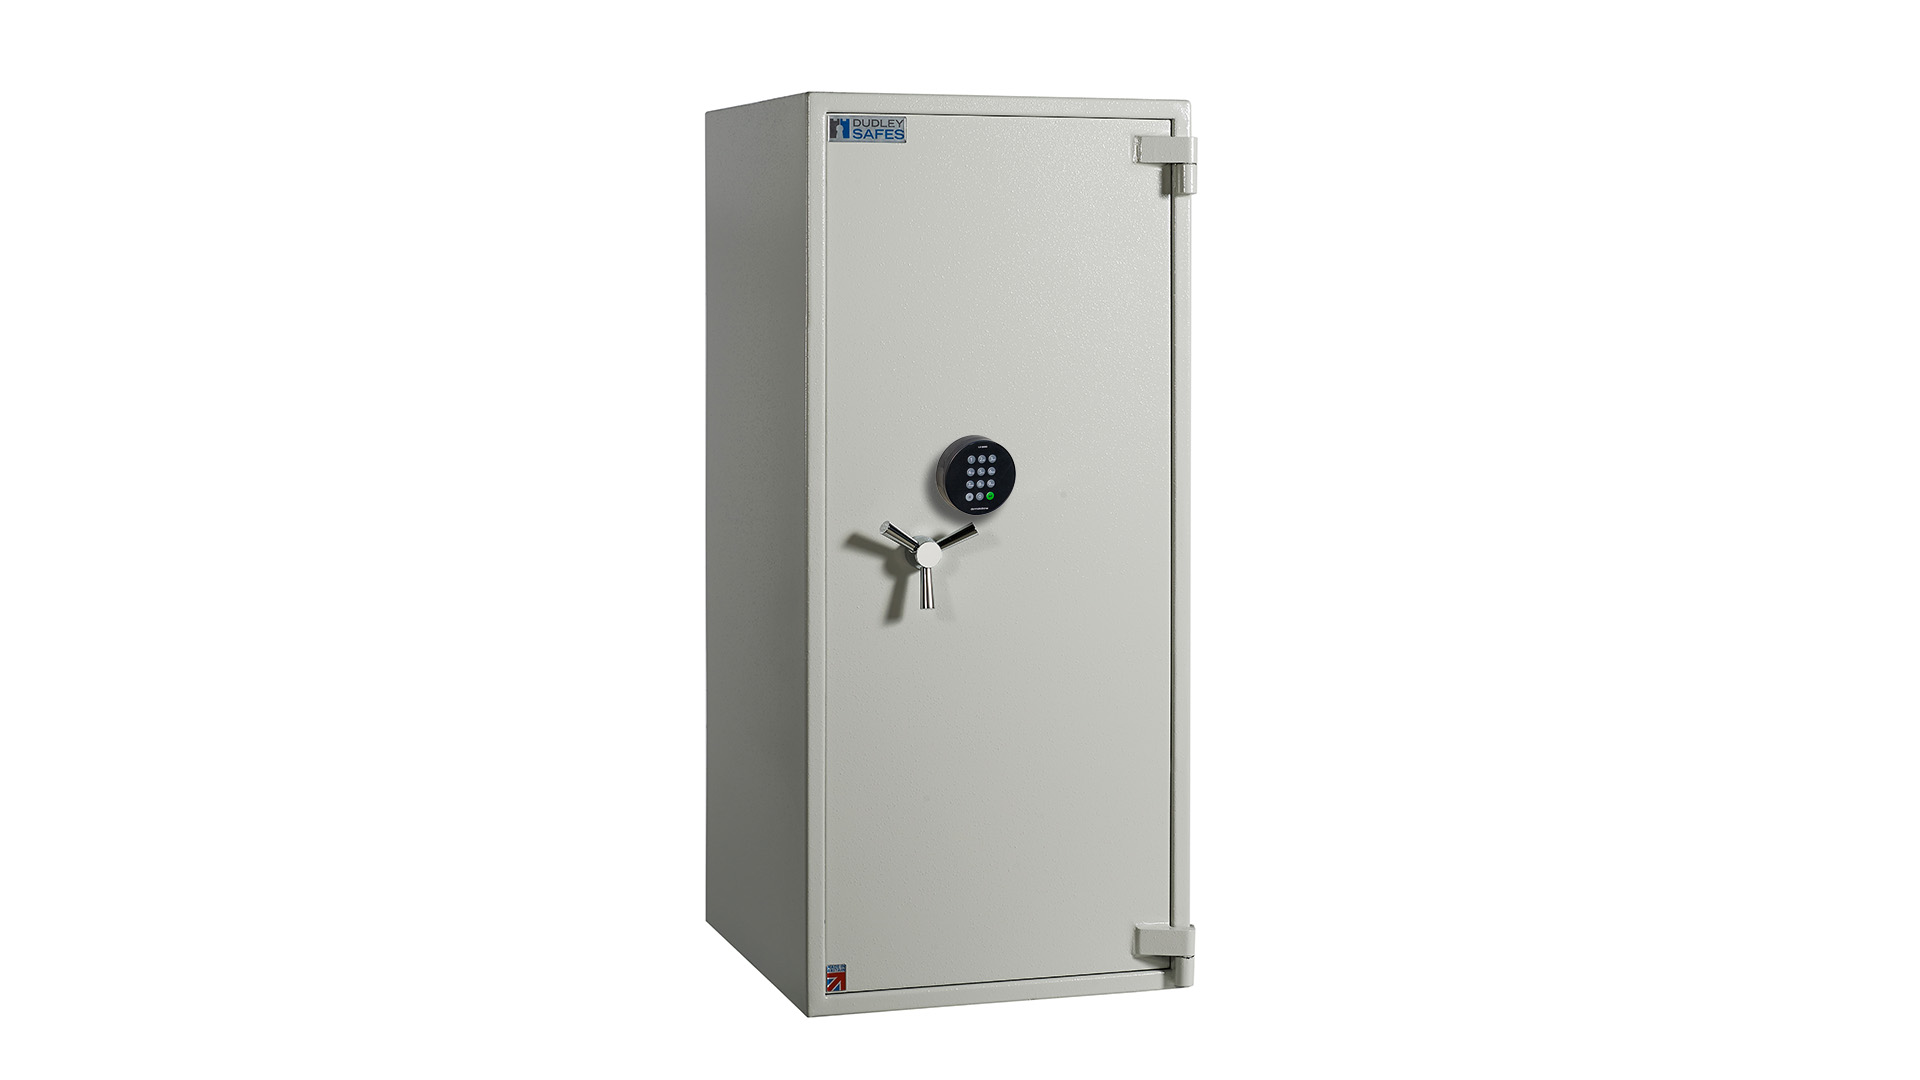 The Dudley EuropaEUR1-06e is a euro grade 1 ,£10,000 cash rated safe that can be used as a commercial safe, office safe or indeed, a safe for the home. Largest in the Europa grade 1 range, it offers high quality and longevity from its heavy duty build. This comes with an electronic code lock.